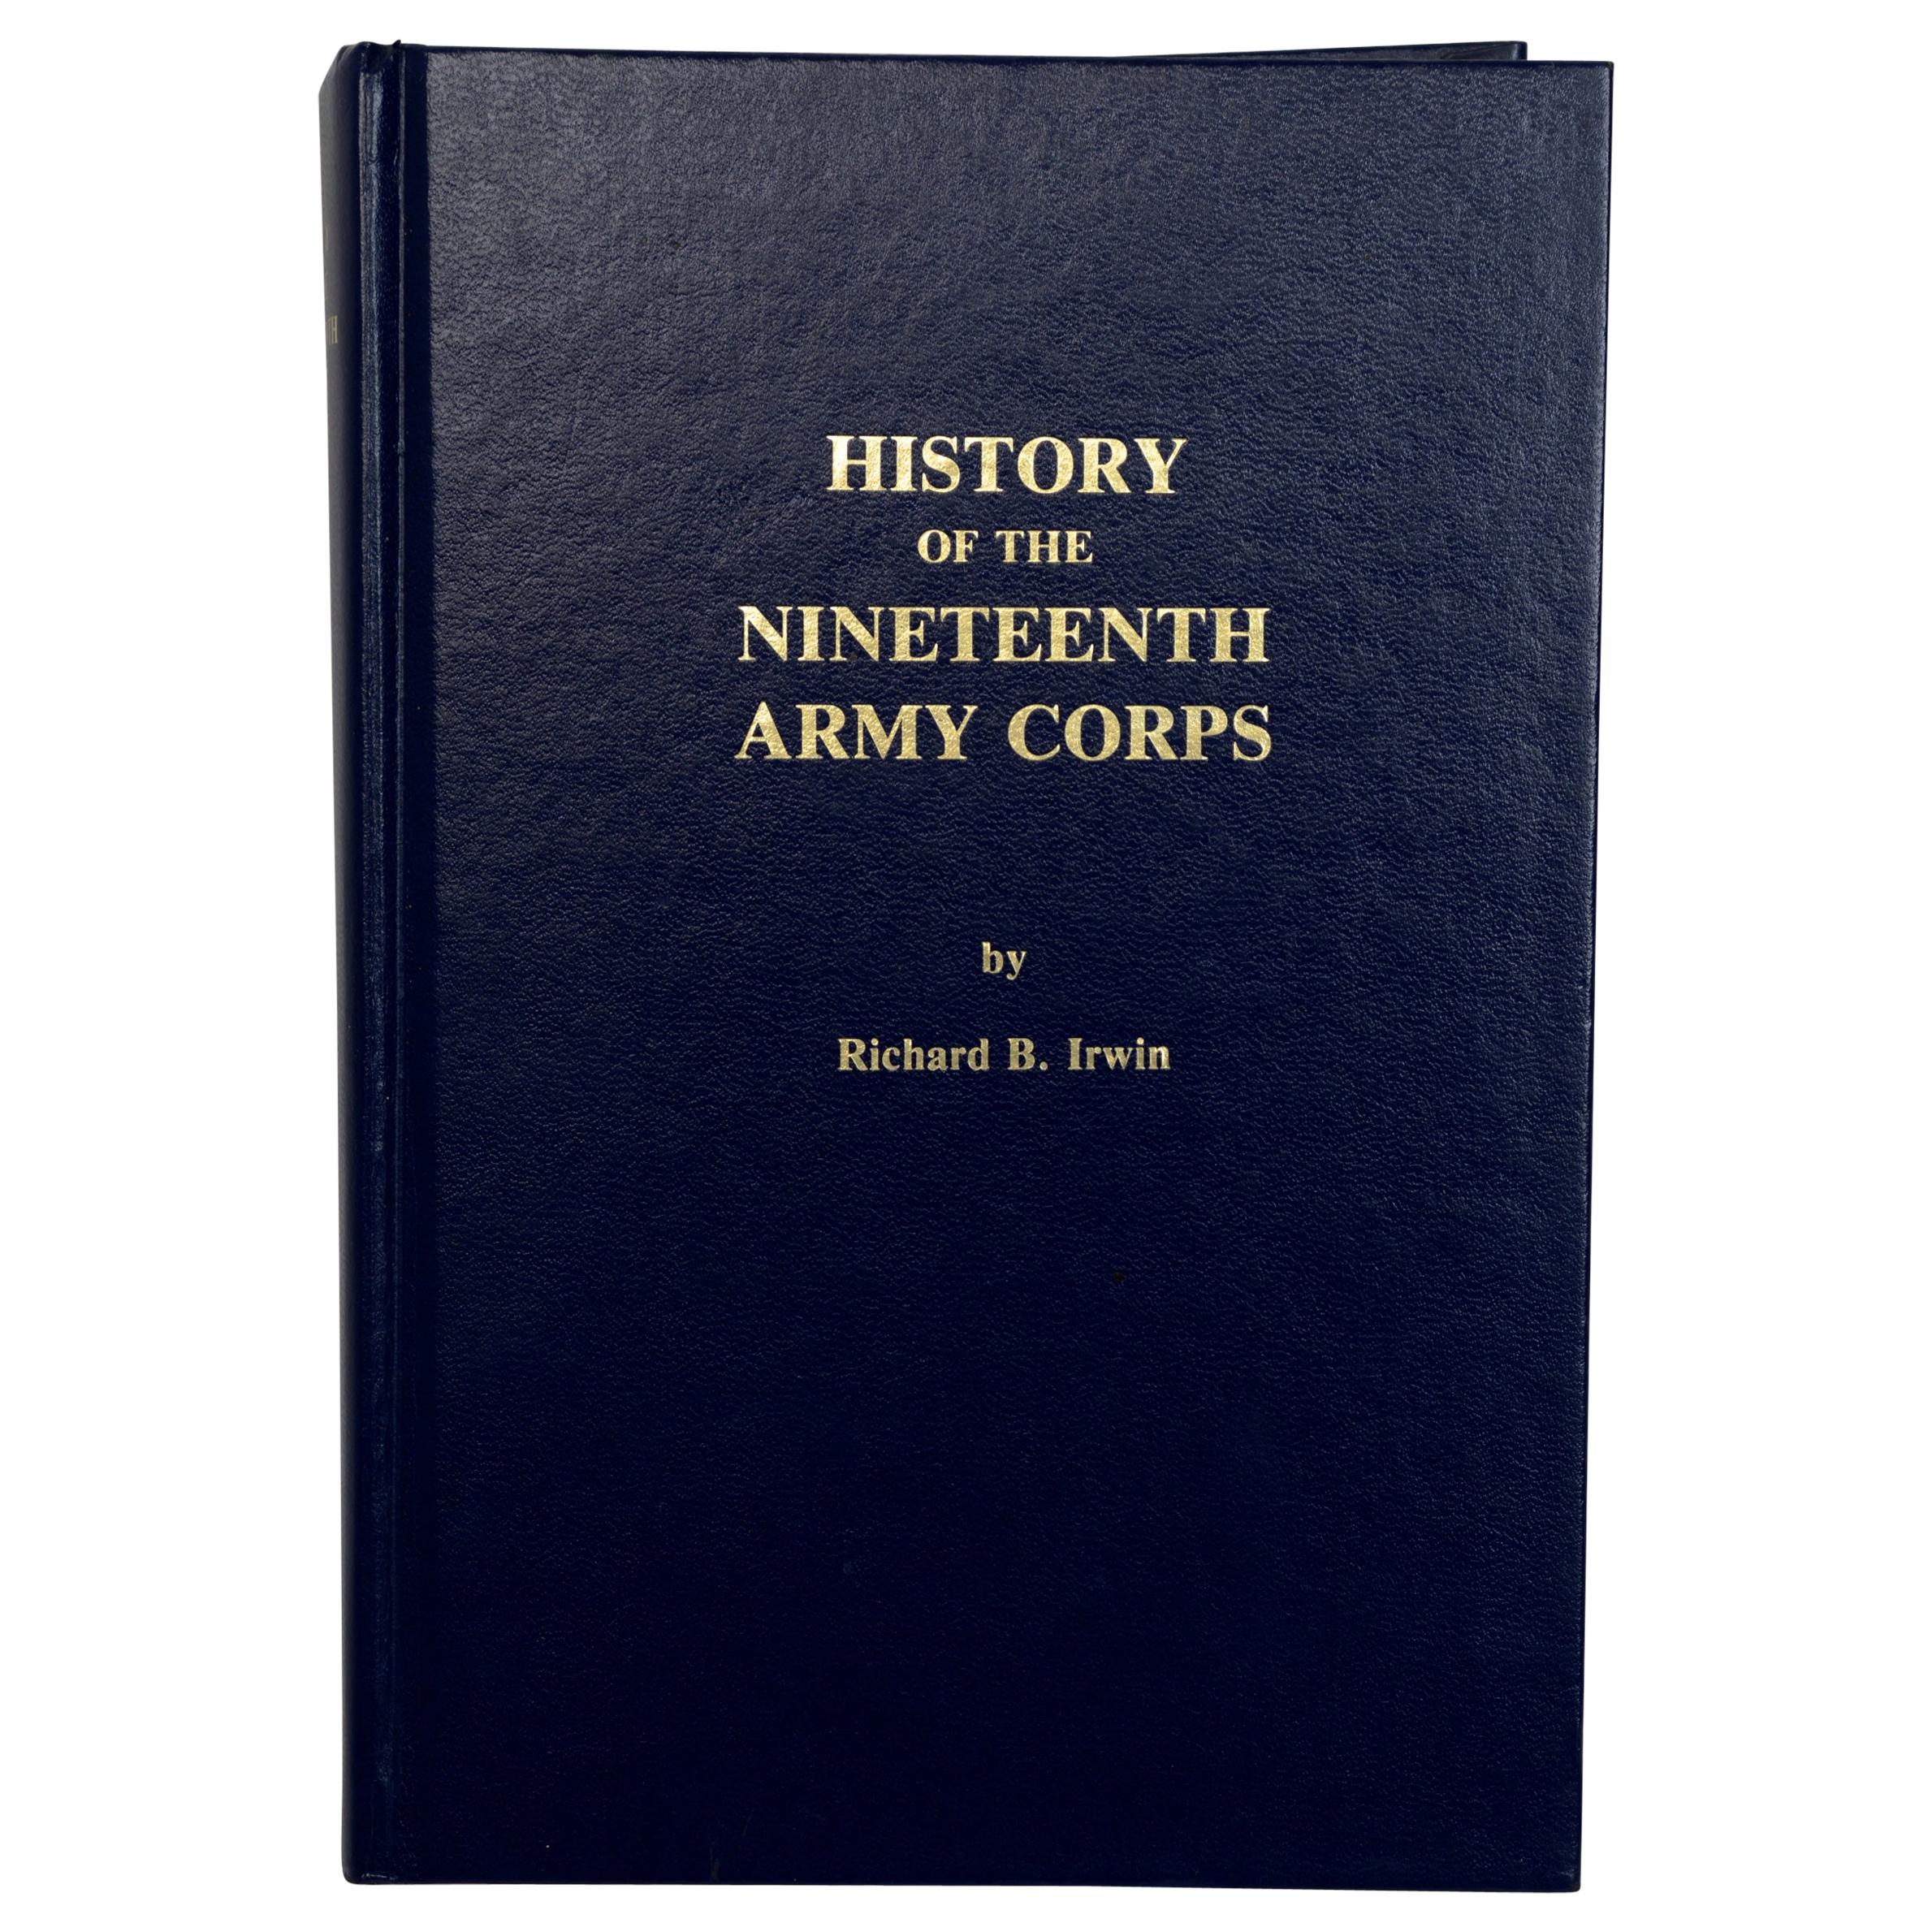 History of the Nineteenth Army Corps by Richard B. Irwin